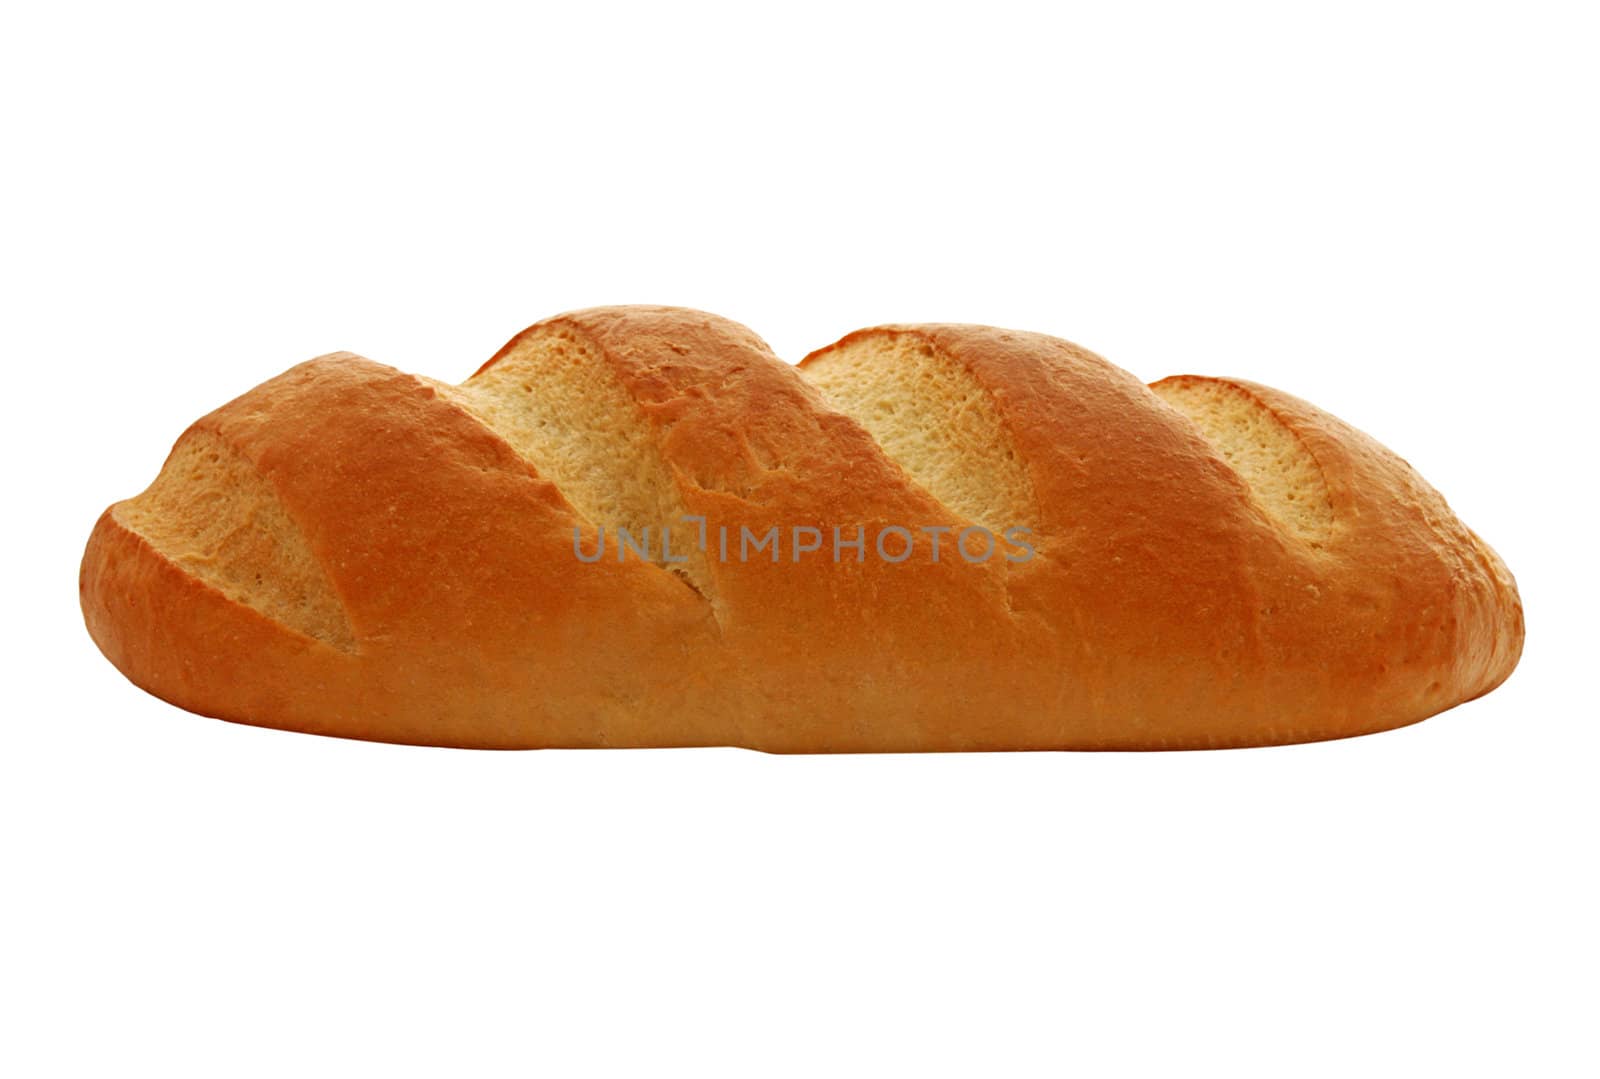 long loaf (wheat bread) isolated on white background